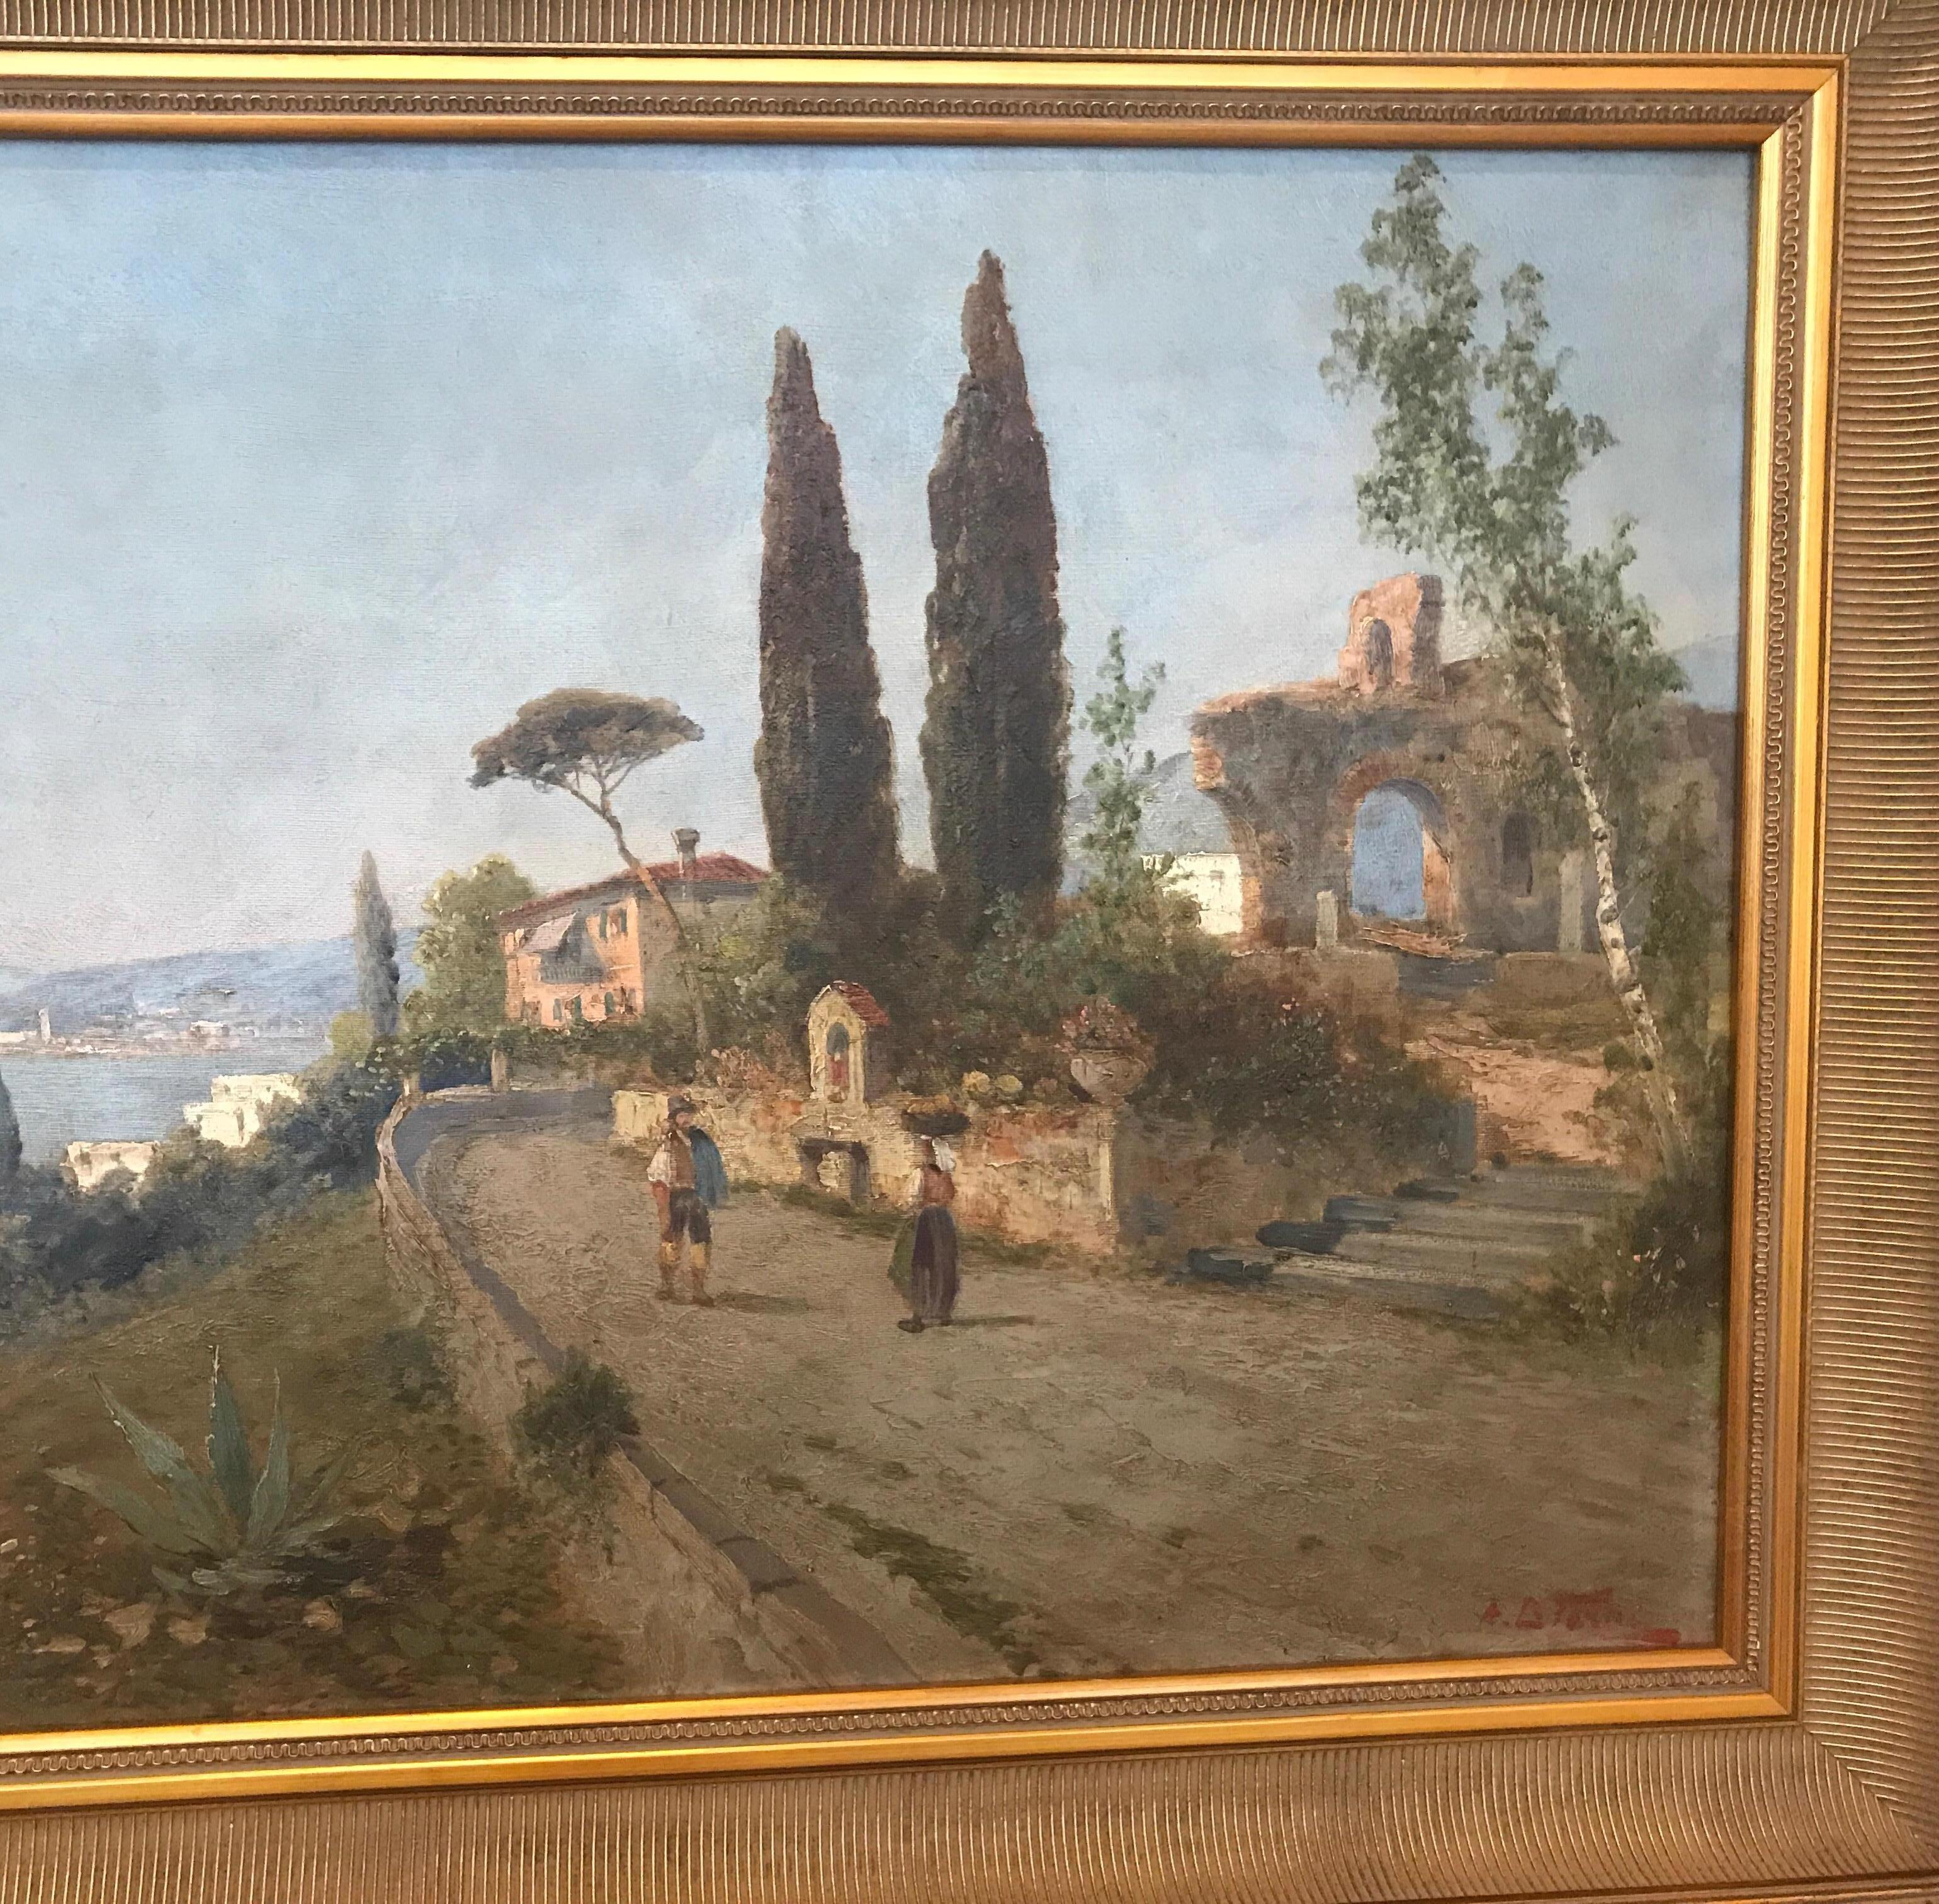 Hand-Painted 19th Century Oil Painting on Canvas Landscape by George Fischhof, Austria